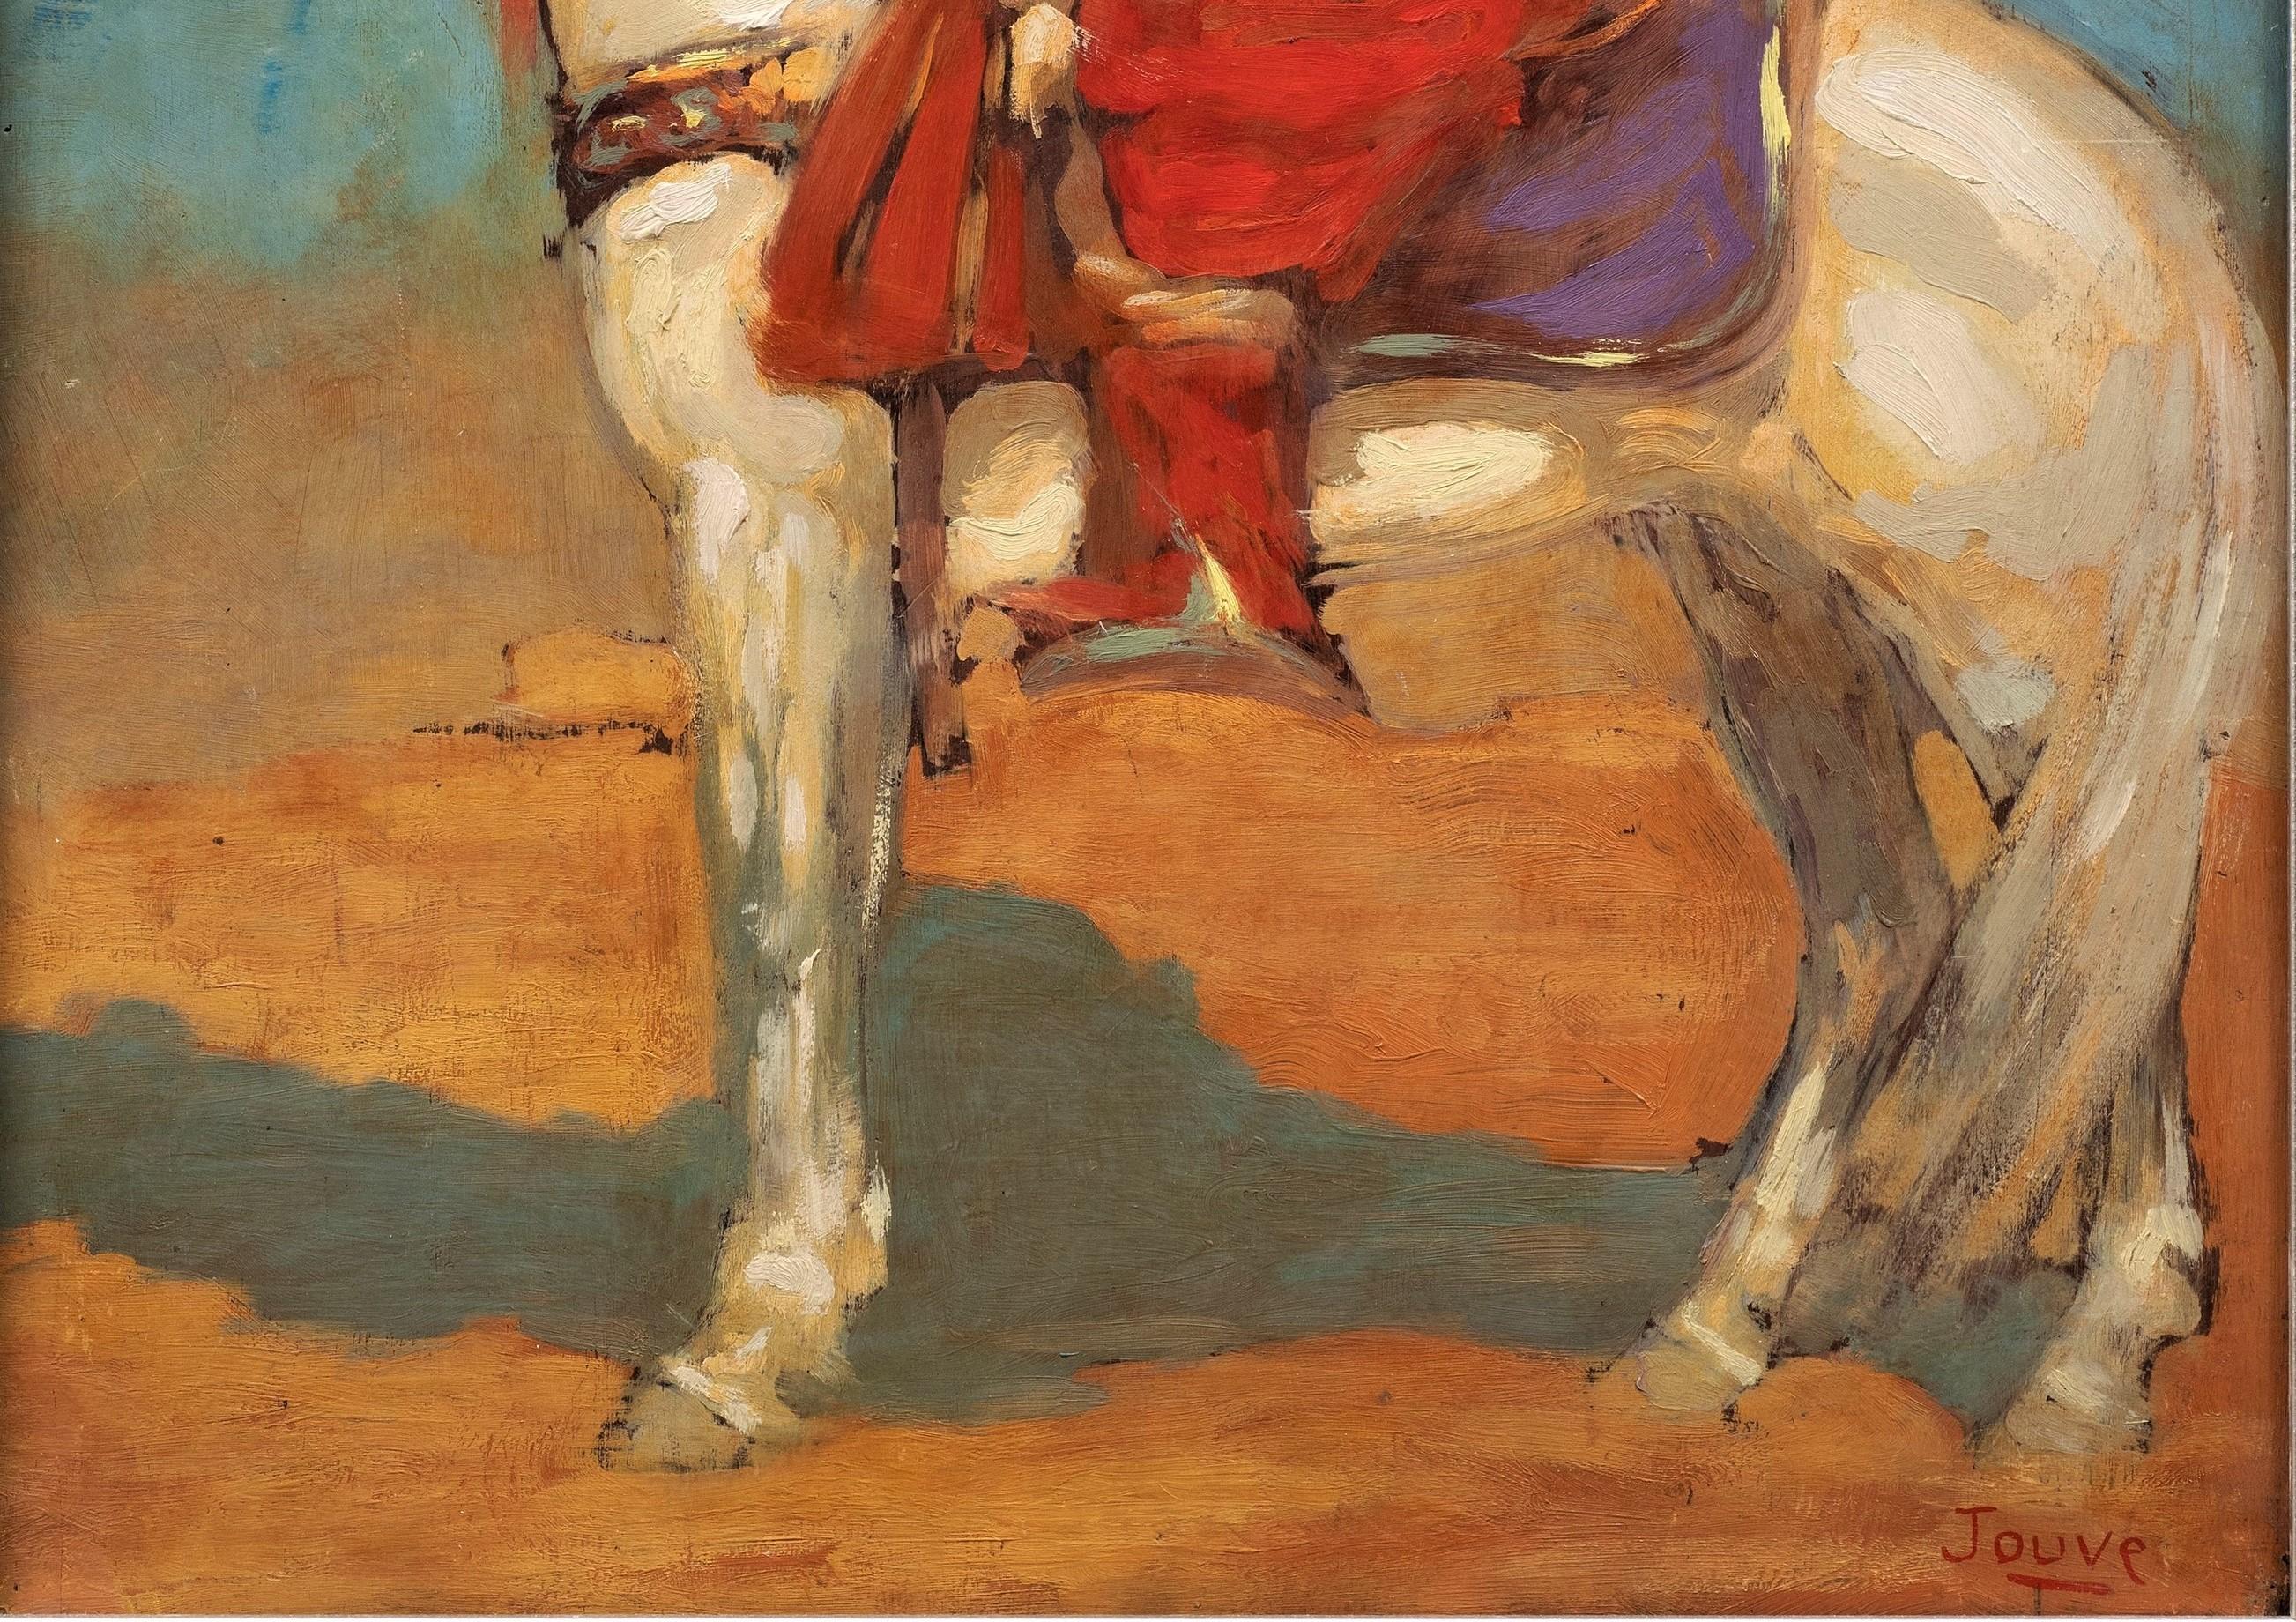 Orientalist Painting Tuareg Horse Rider in the Desert, 1908 by Paul Jouve For Sale 1